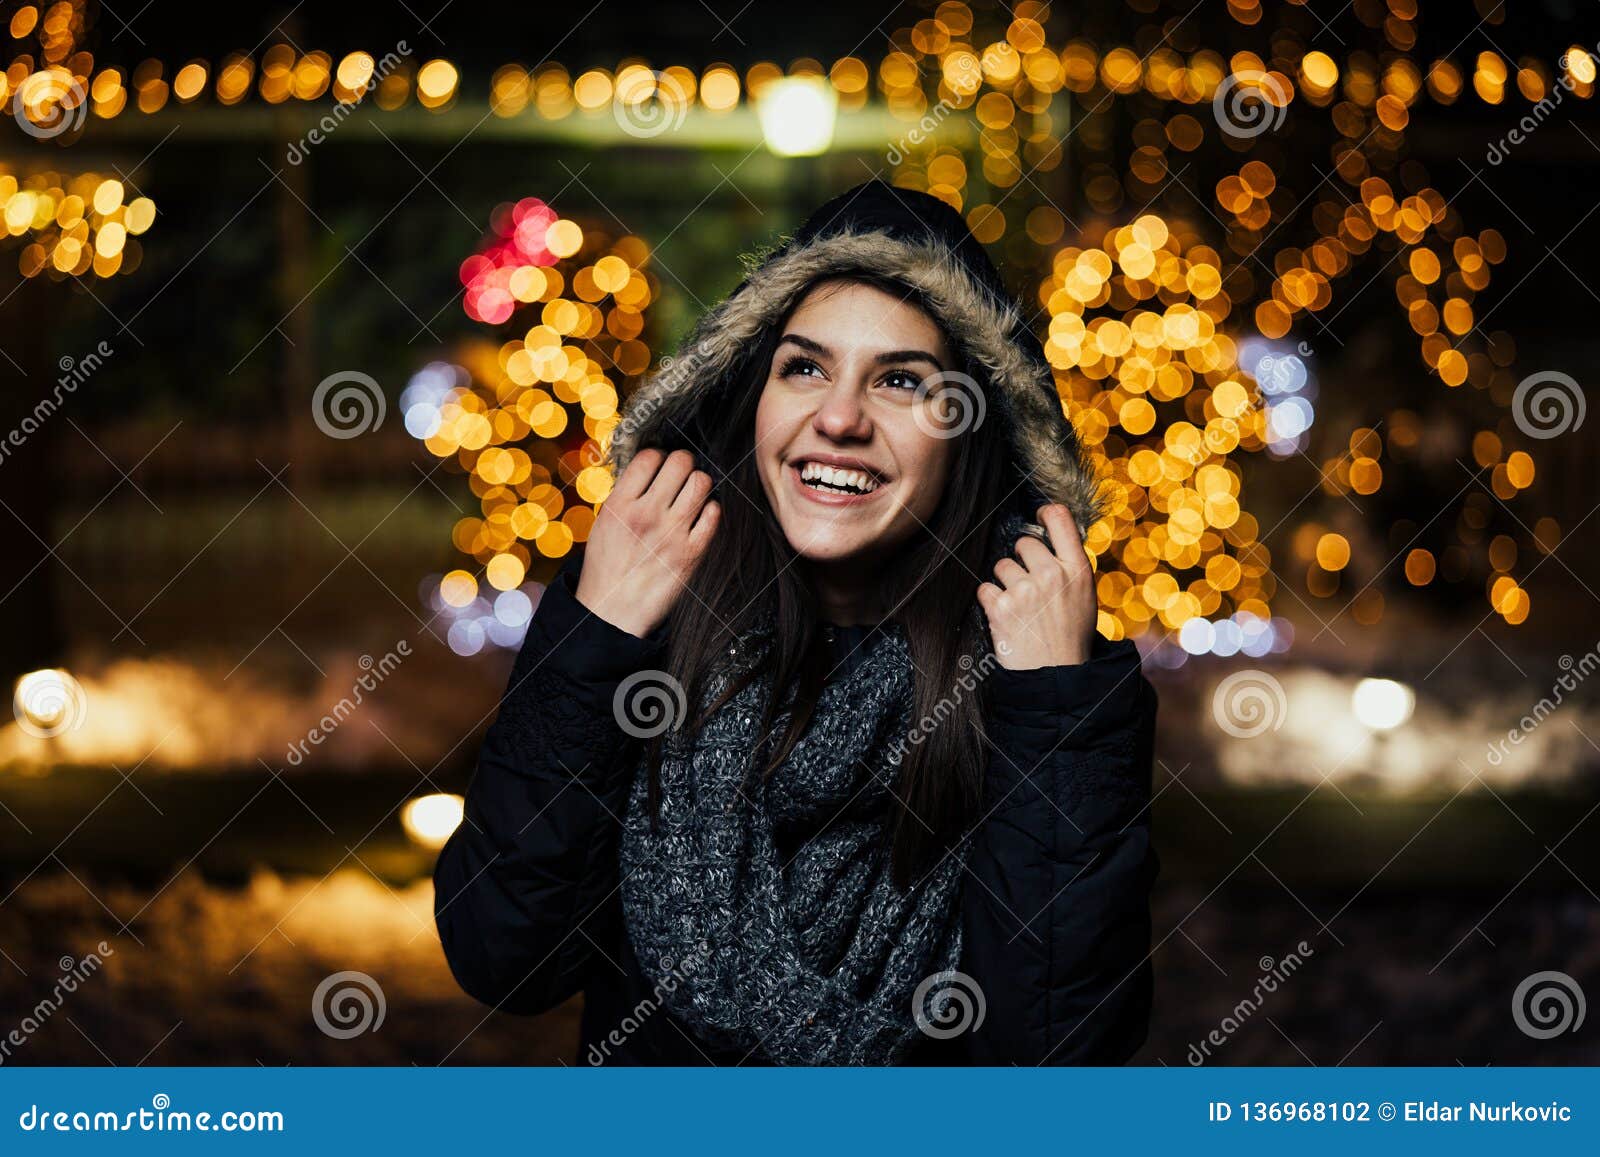 Night Portrait of a Beautiful Happy Woman Smiling Enjoying Winter and ...